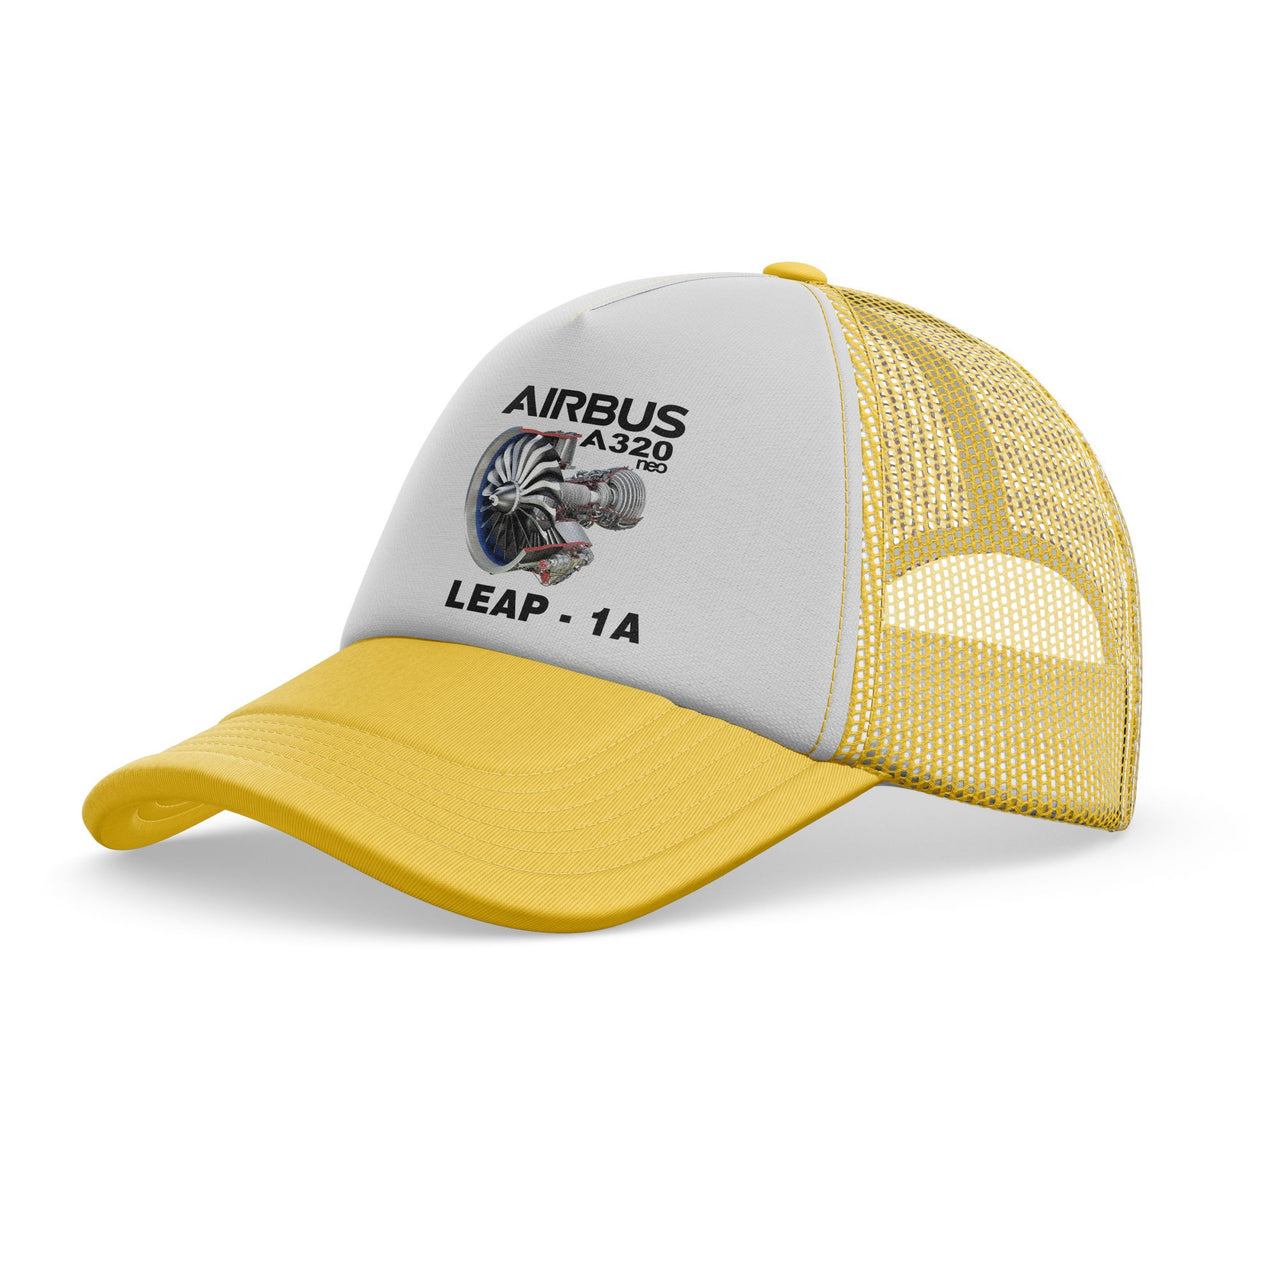 Airbus A320neo & Leap 1A Designed Trucker Caps & Hats